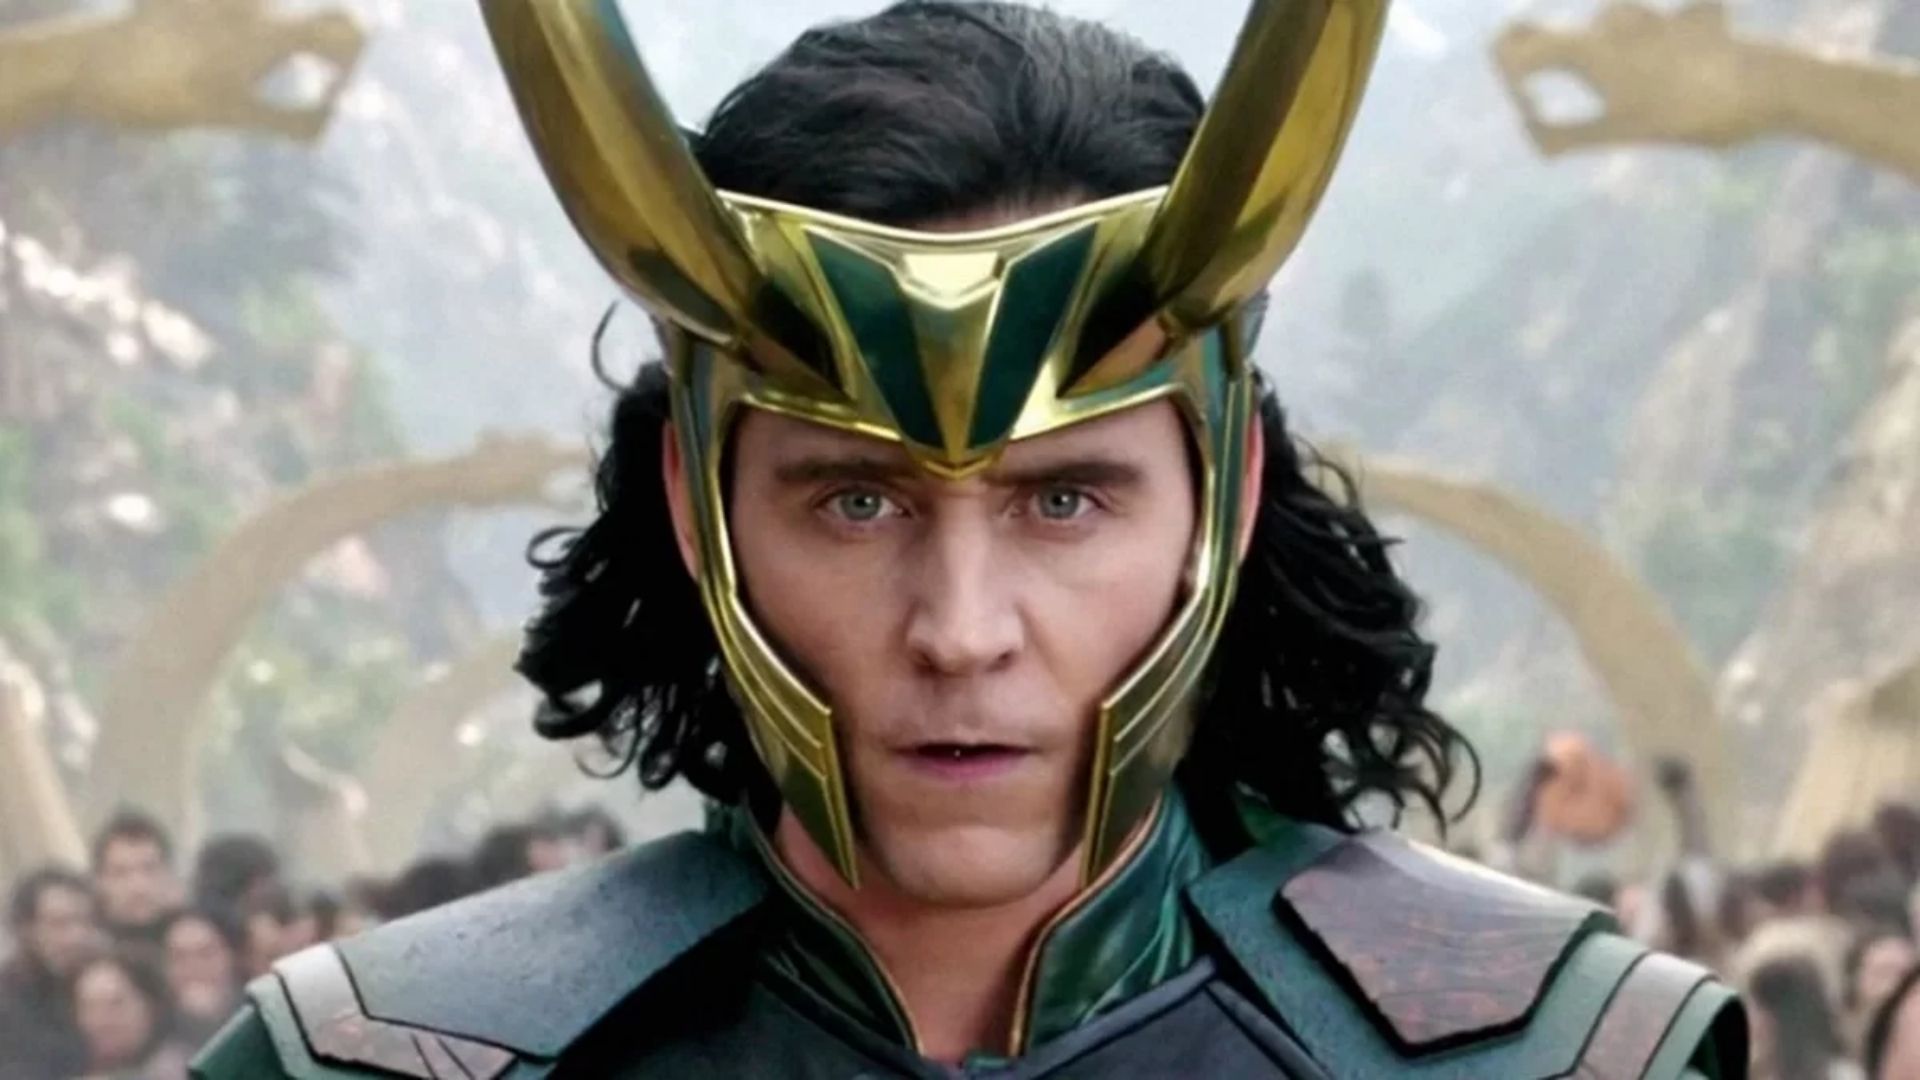 Loki, the crowd favorite villain, returns in new episodes of his series on Disney+ (Photo: Reproduction / Marvel Studios)